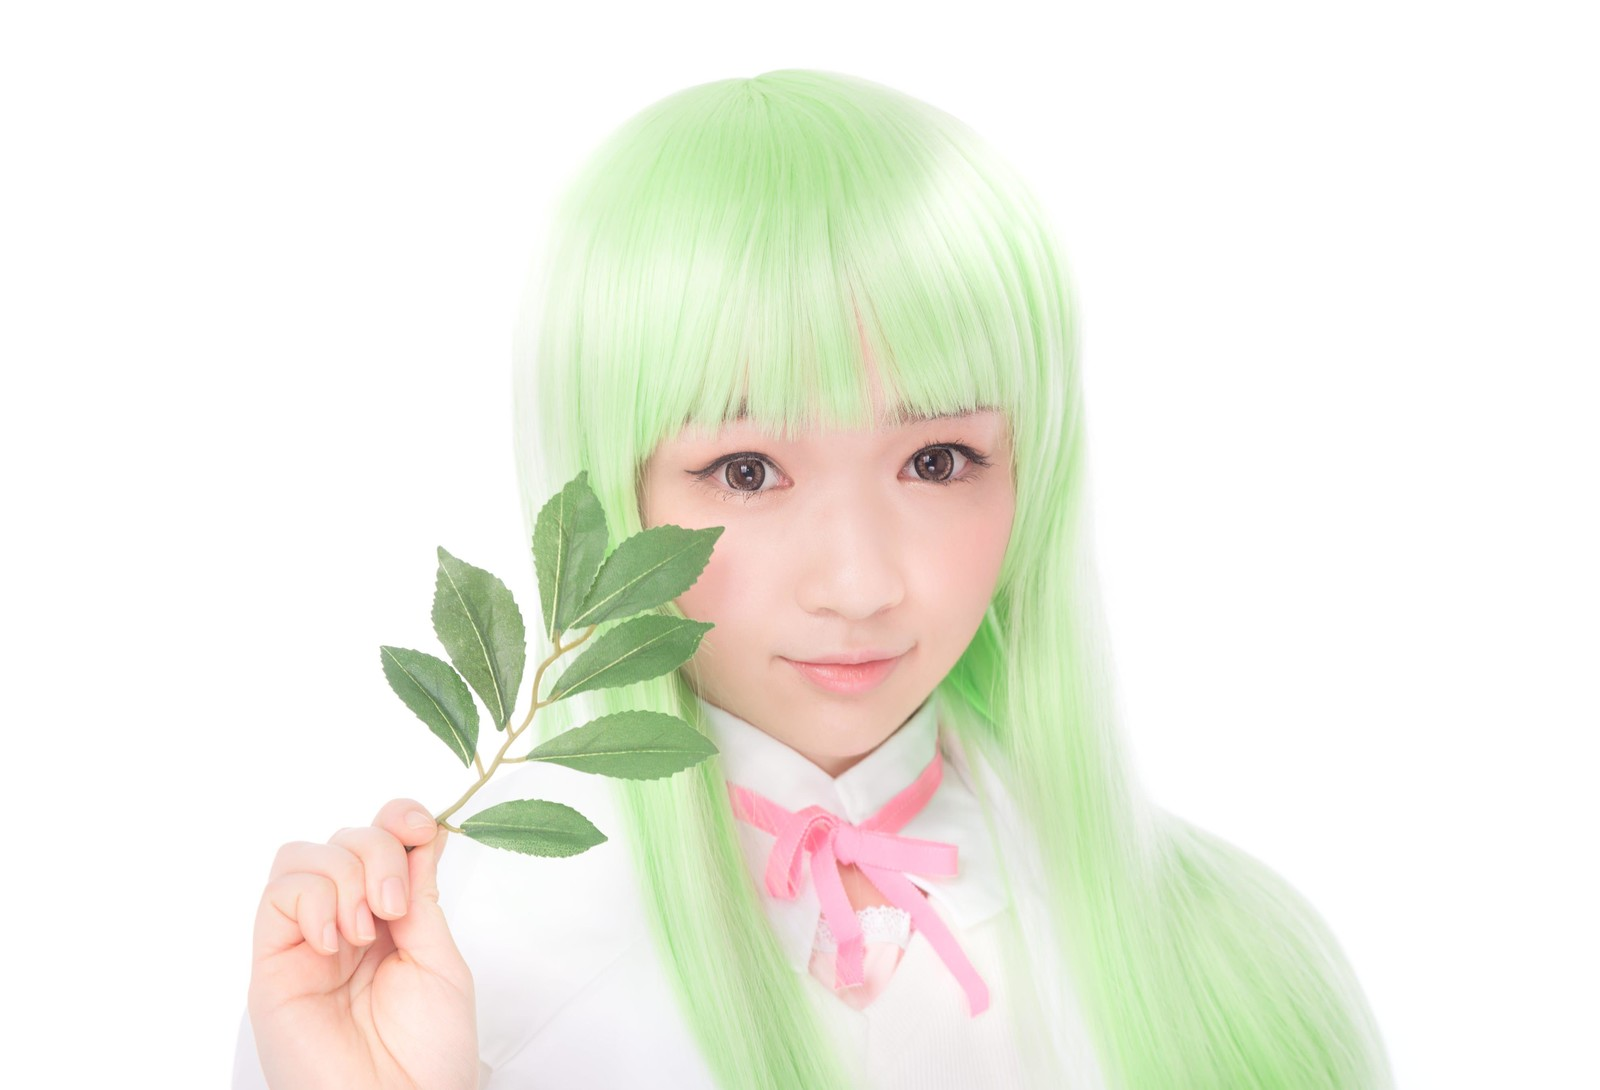 Who are anime characters with green hair? - Quora